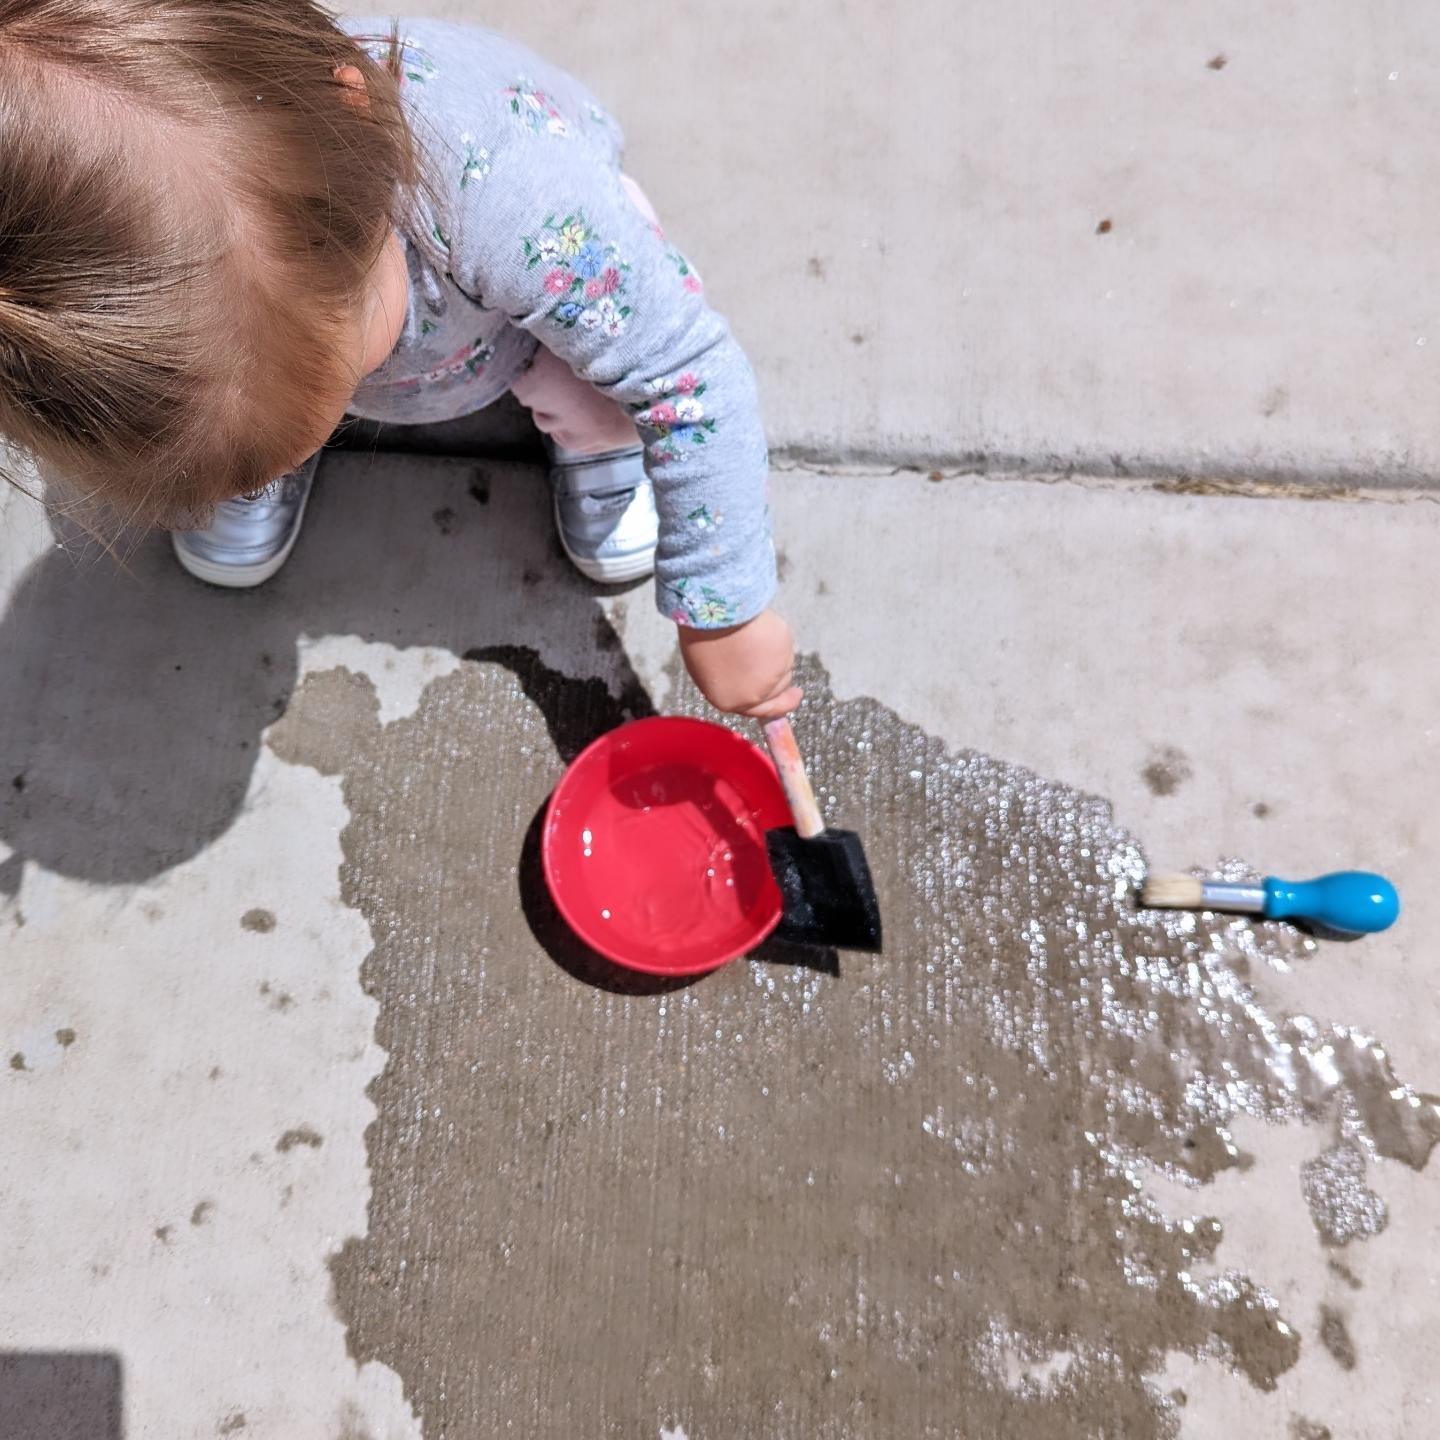 ⭐Reminder! You don't need paper and pencil to practice fine motor skills. 

☀️Nice day? Grab a bowl of water, a paintbrush and head outside! Paint/write on the sidewalk or fence!

This also makes for a great toddler activity! 🙌

#finemotorskills #fi